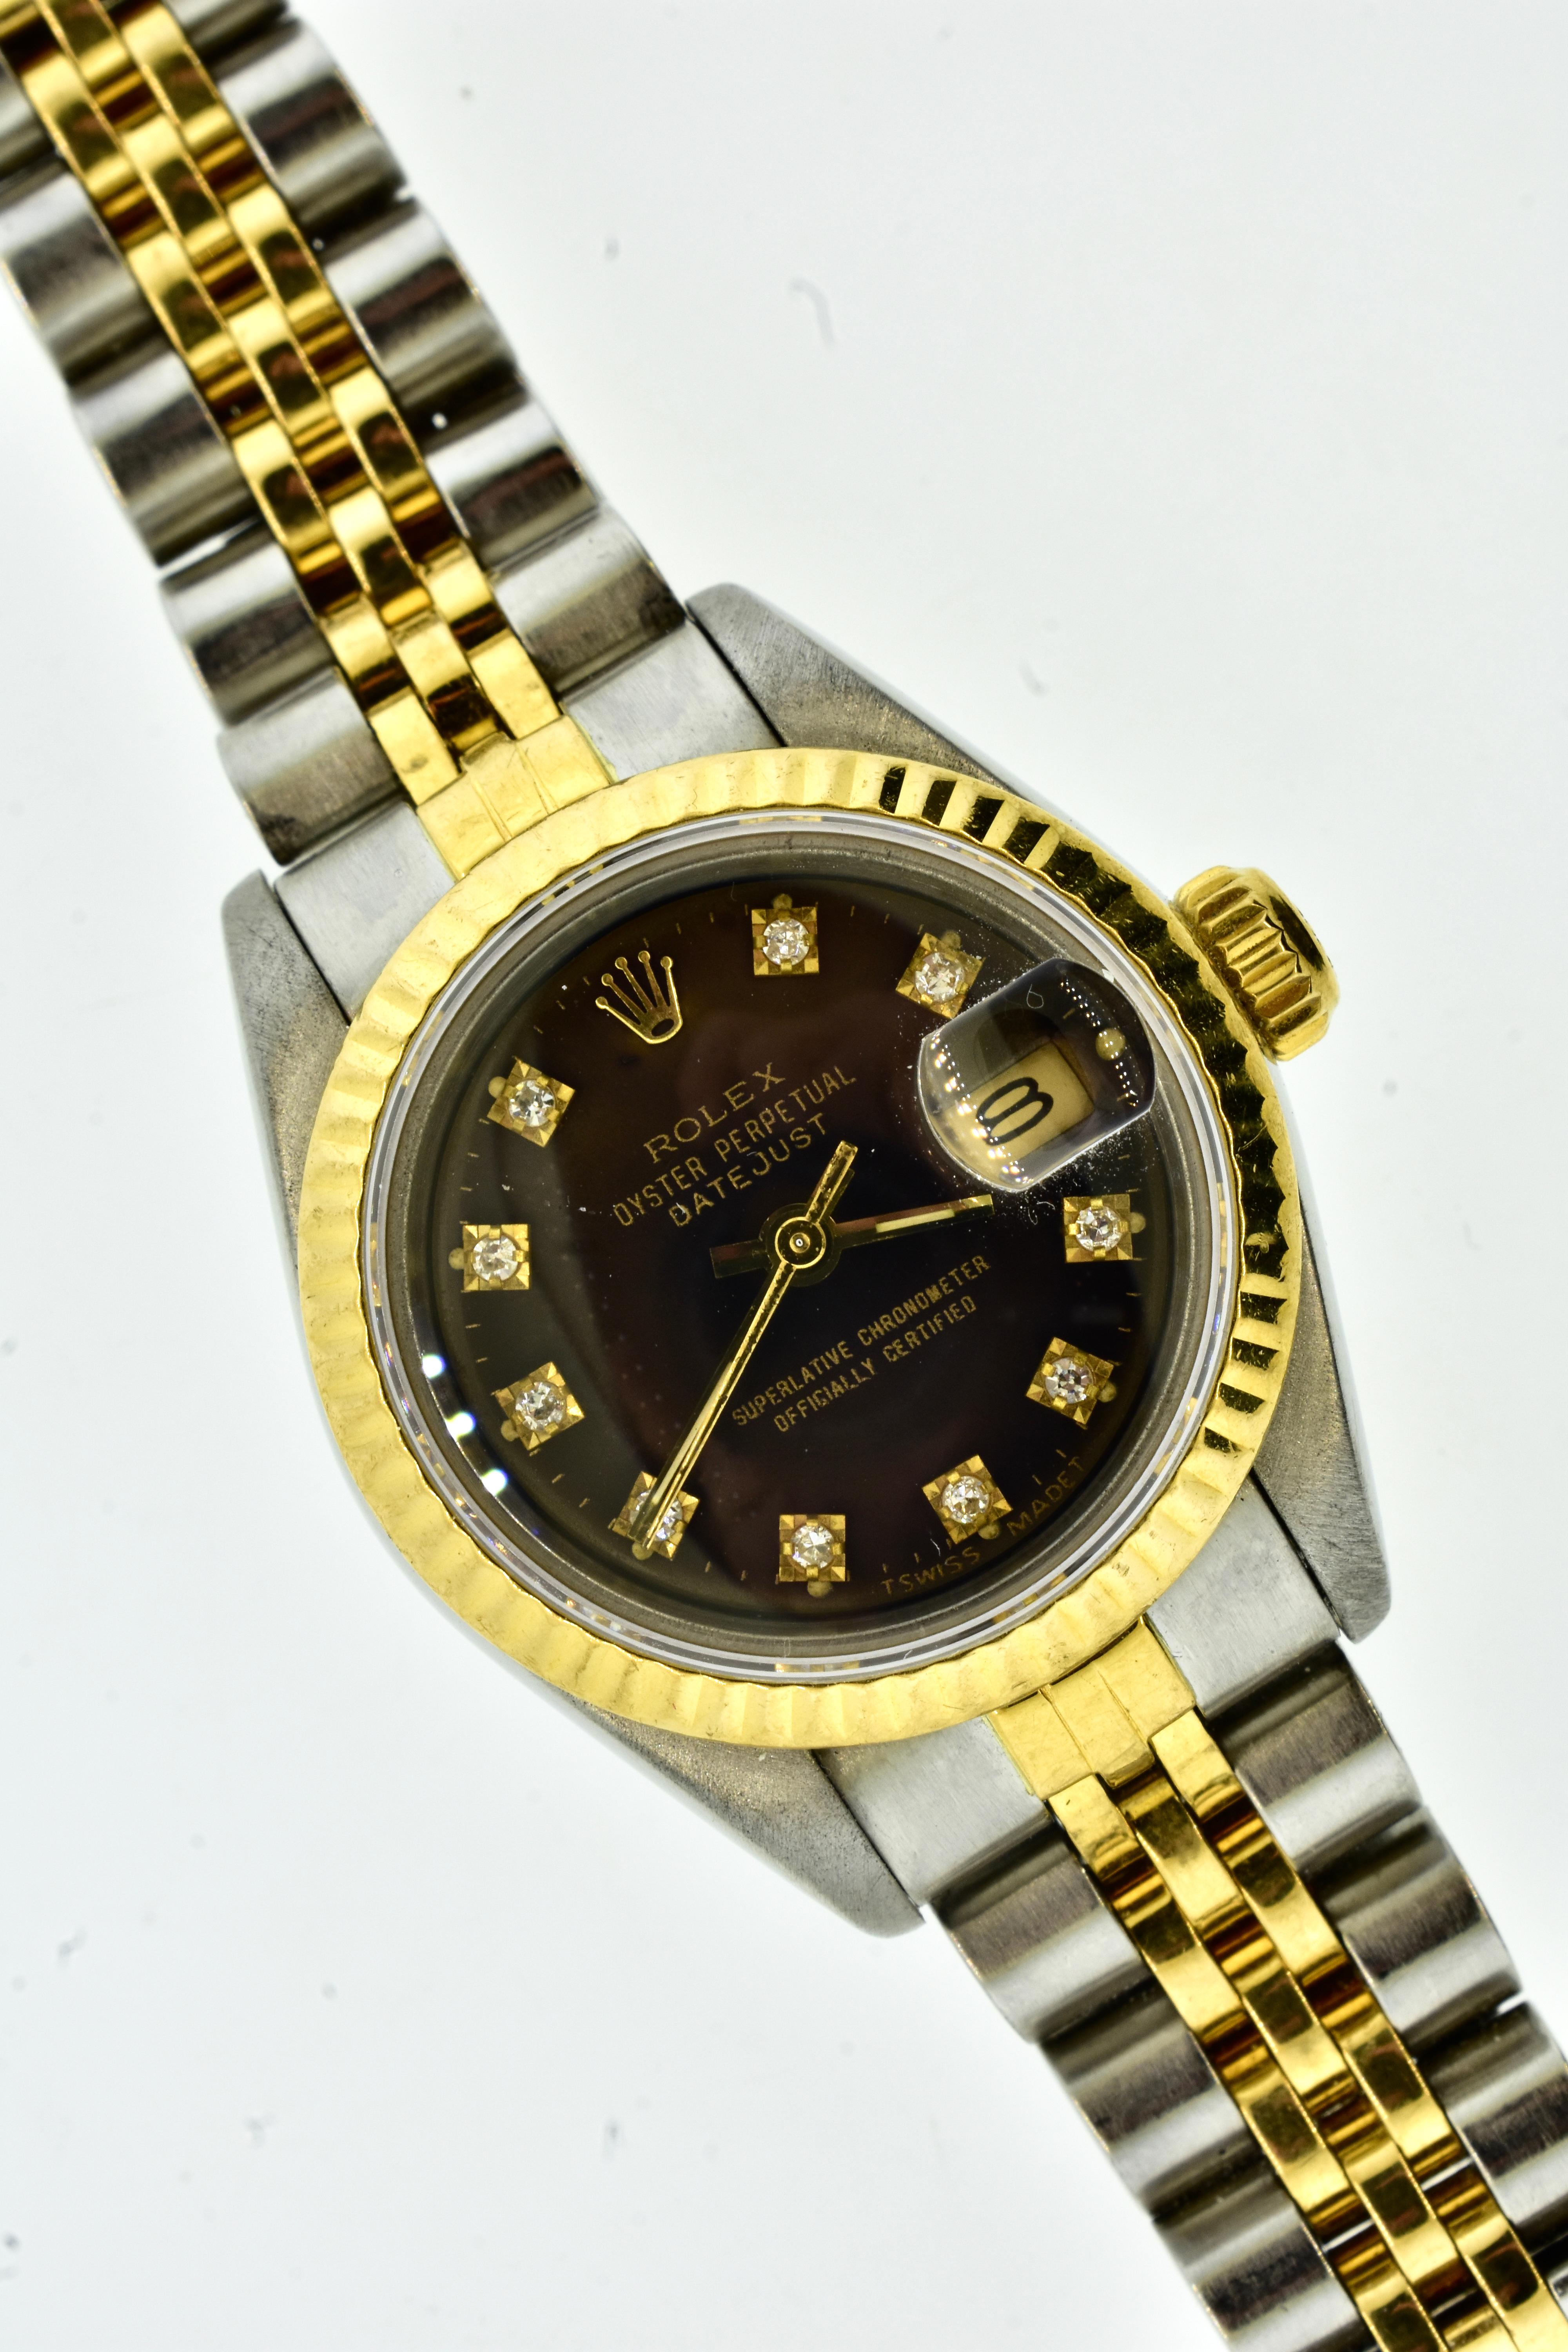 Rolex, Model No. 69173.  Stainless Steel and 18K Yellow Gold diamond hour markers with each surround in 18K yellow gold.  Movement is automatic, No. 2235.  Waterproof down to 100 meters - about 300 feet. Chocolate dial with fluted 18K yellow gold